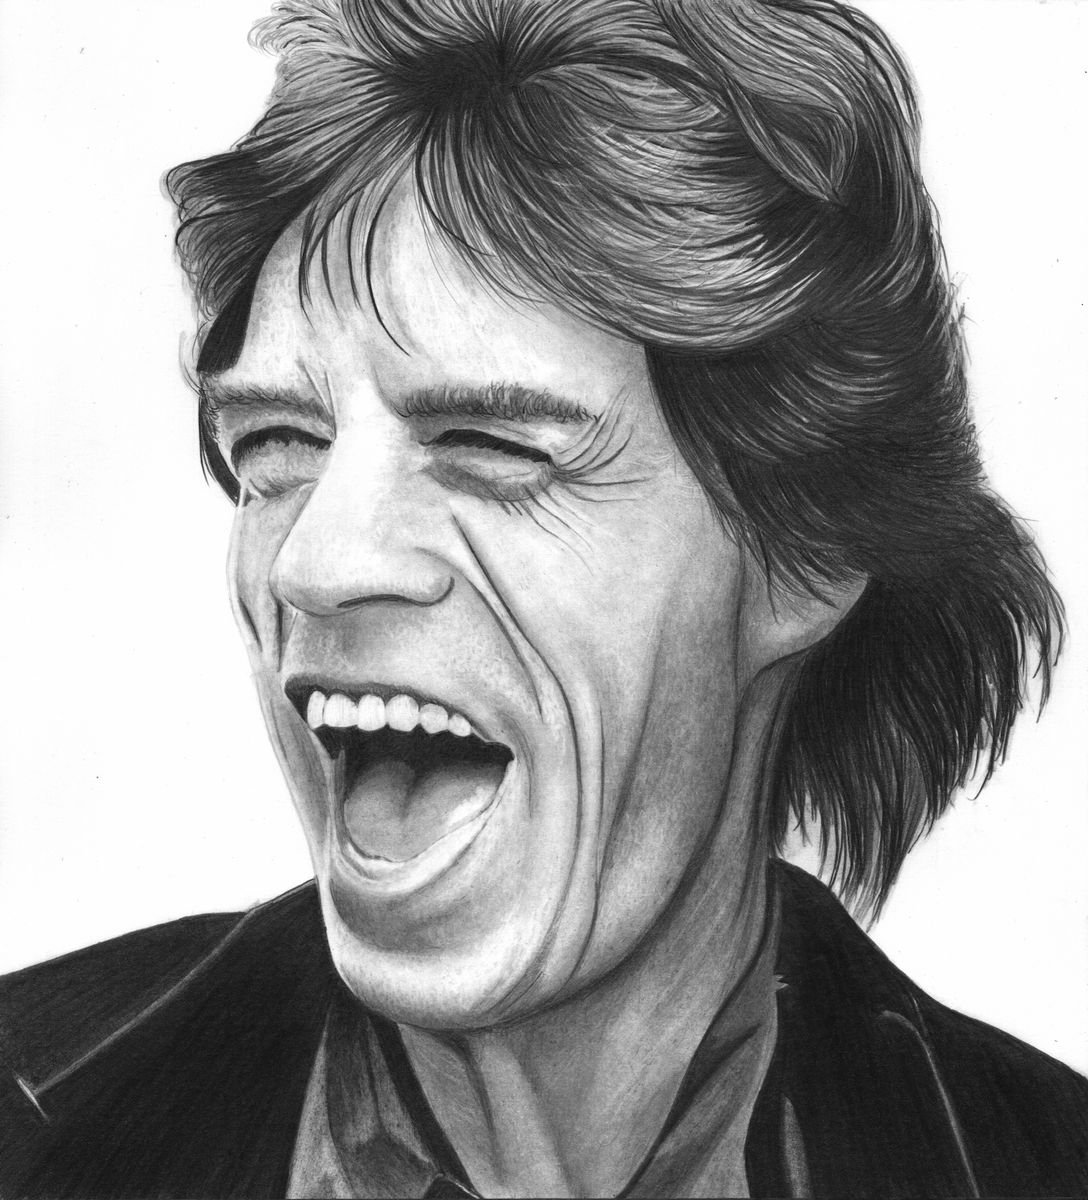 Mick Jagger by Paul Stowe